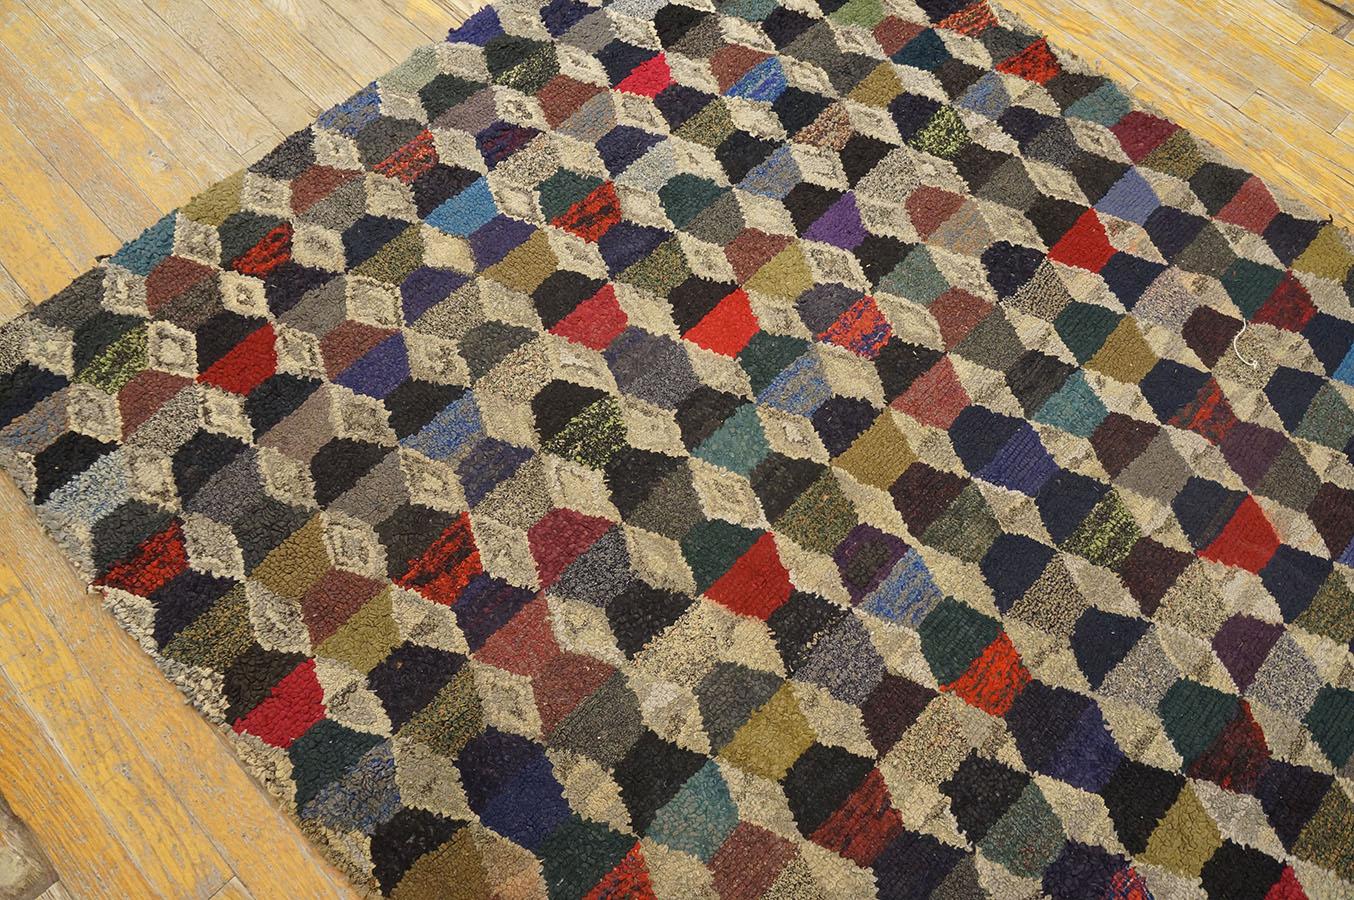 Mid-20th Century Early 20th Century American Hooked Rug ( 4'2'' x 5'4'' - 127 x 162 cm ) For Sale